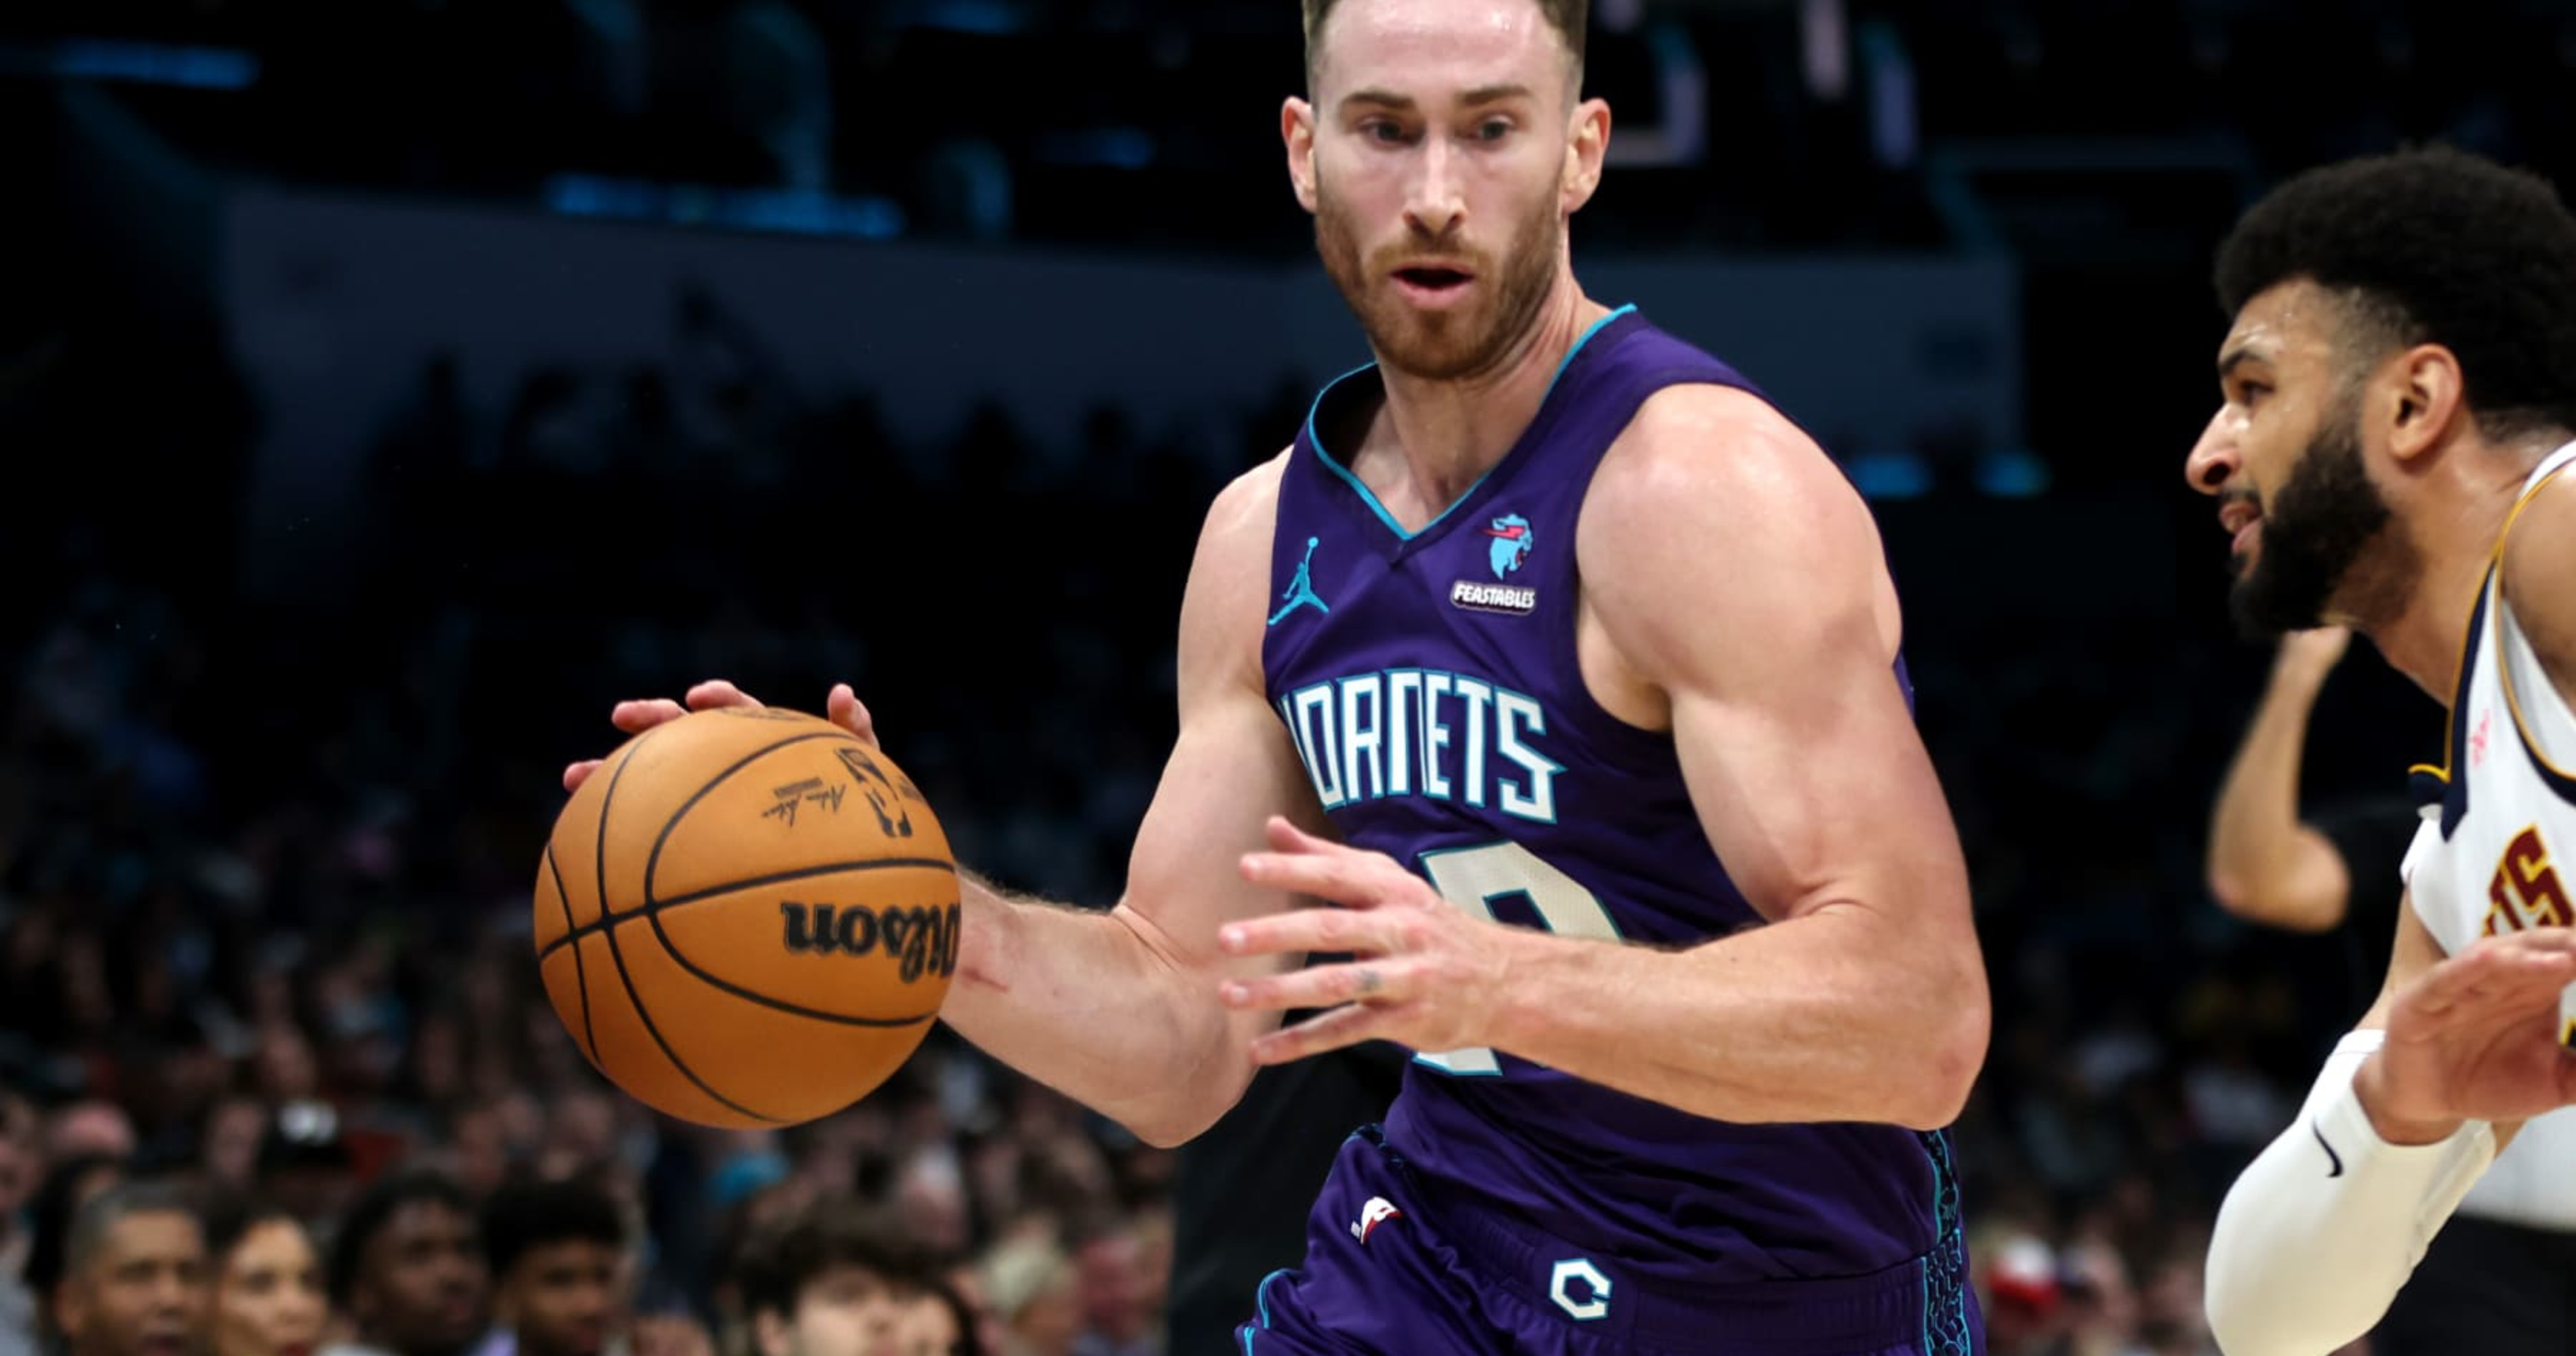 NBA Trade Rumors: Hornets' Gordon Hayward Available, Could Be Buyout Candidate